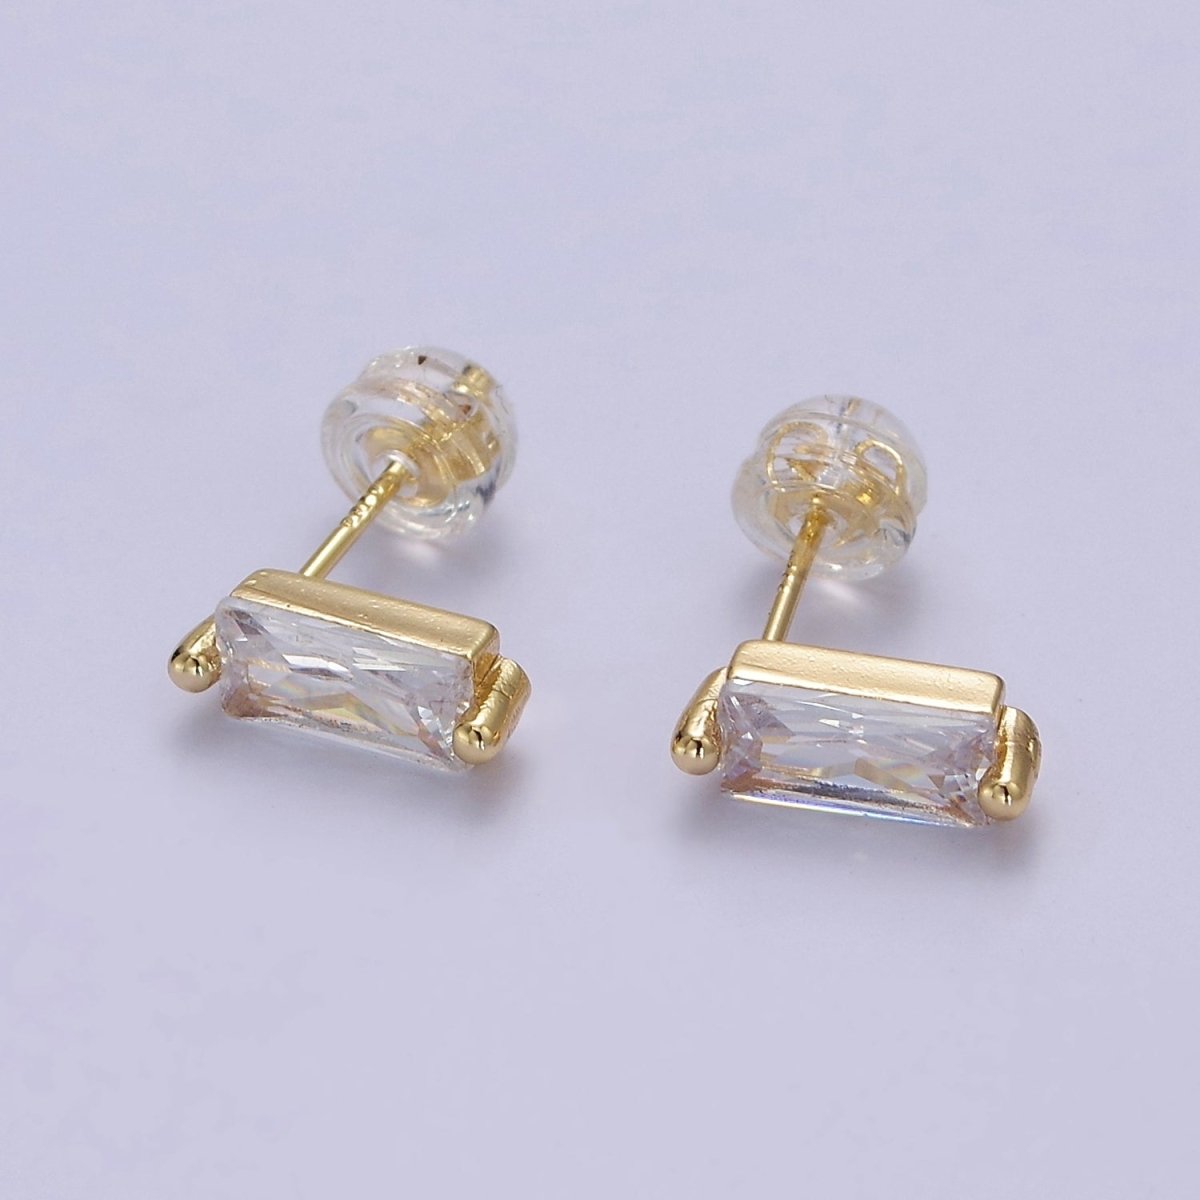 Gold Filled Tiny baguette stud earrings | second hole earrings | tiny rectangle studs | Baguette shaped studs V-123 - DLUXCA